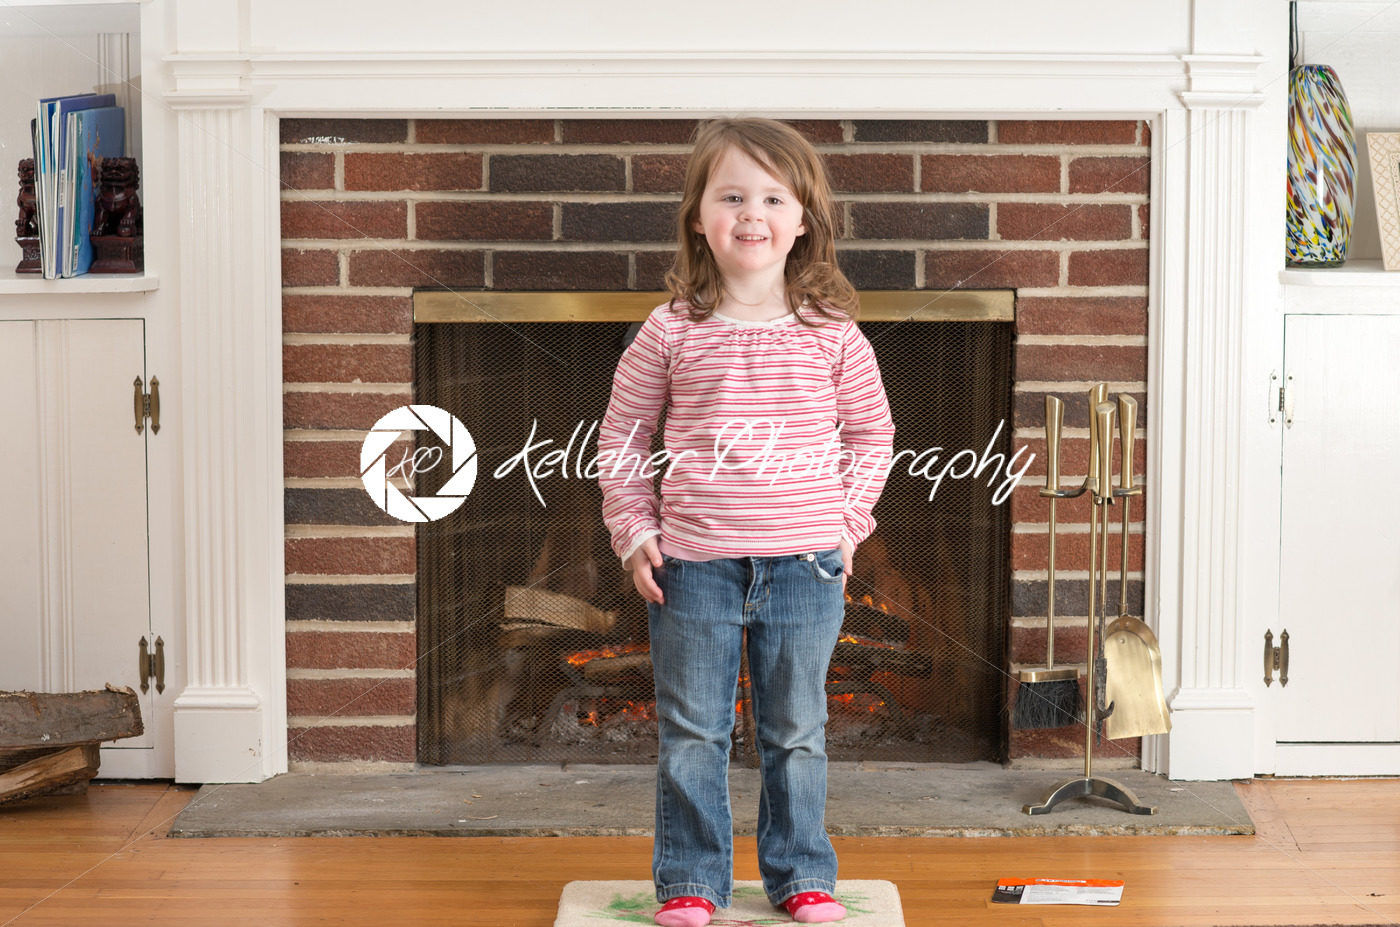 Portrait of a young smiling girl in front of a fireplace dressed for valentine’s day - Kelleher Photography Store